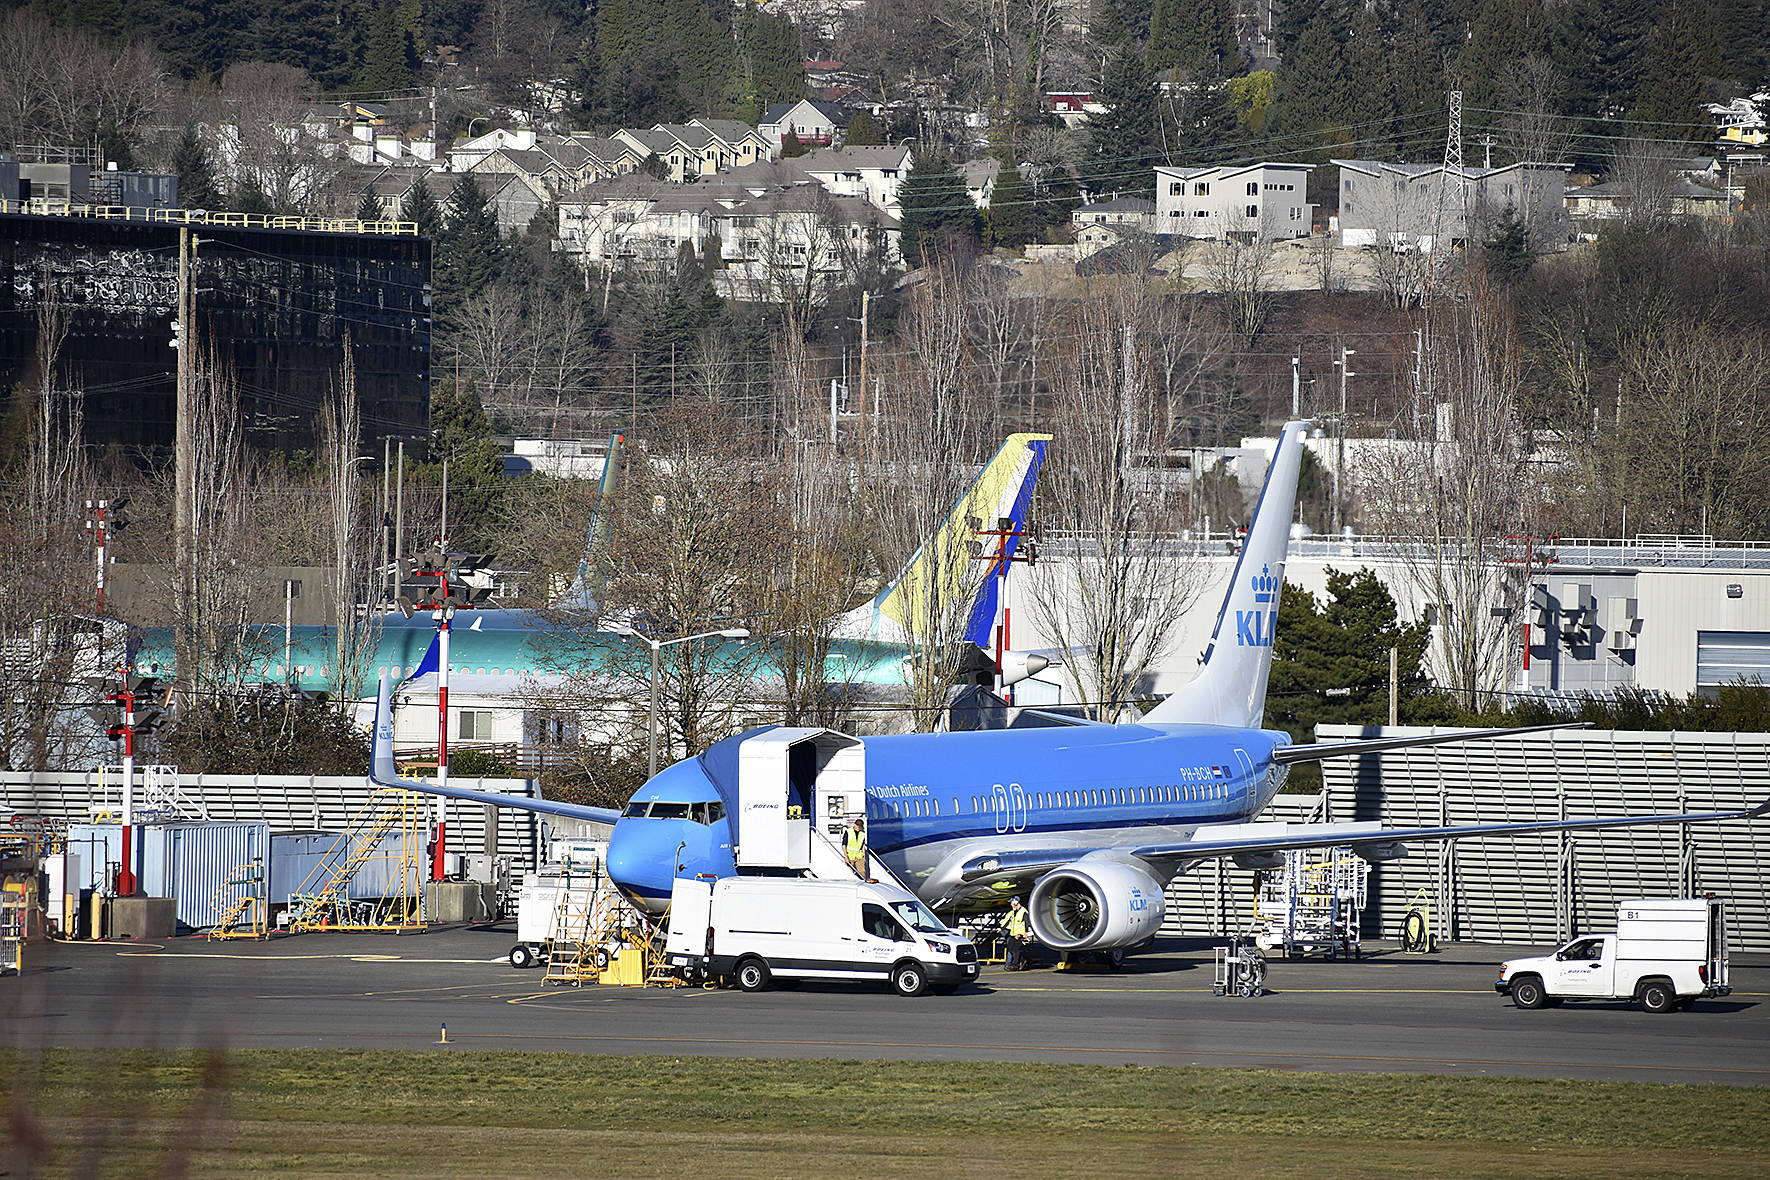 Photo by Haley Ausbun. Boeing employees check on some of the parked MAX planes at the Renton plant where they are assembled, Spring 2019.